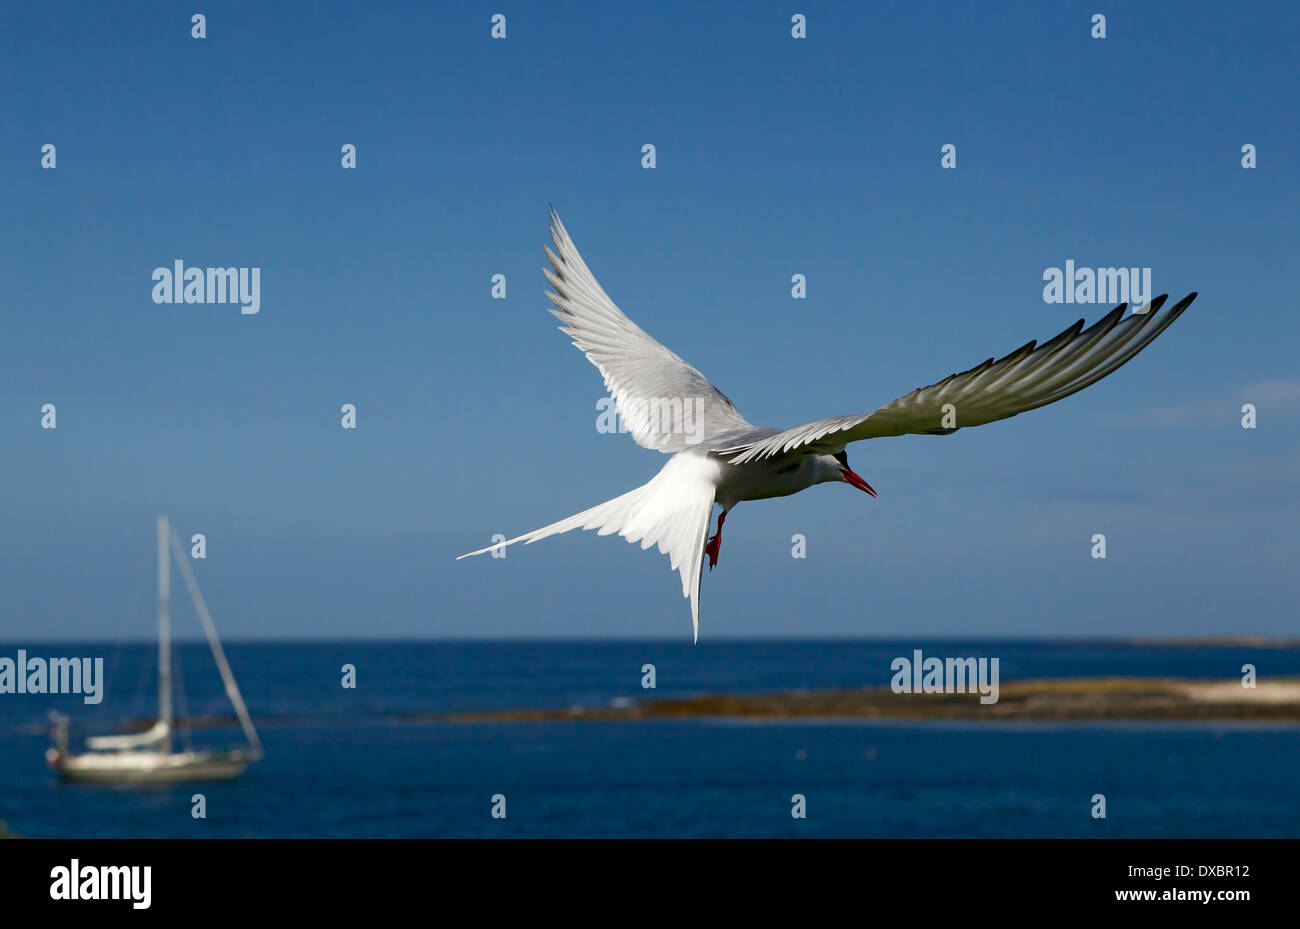 Arctic tern hovering over the sea on the Farne Islands with sail boat in the background, Northumberland, England, UK. Stock Photo